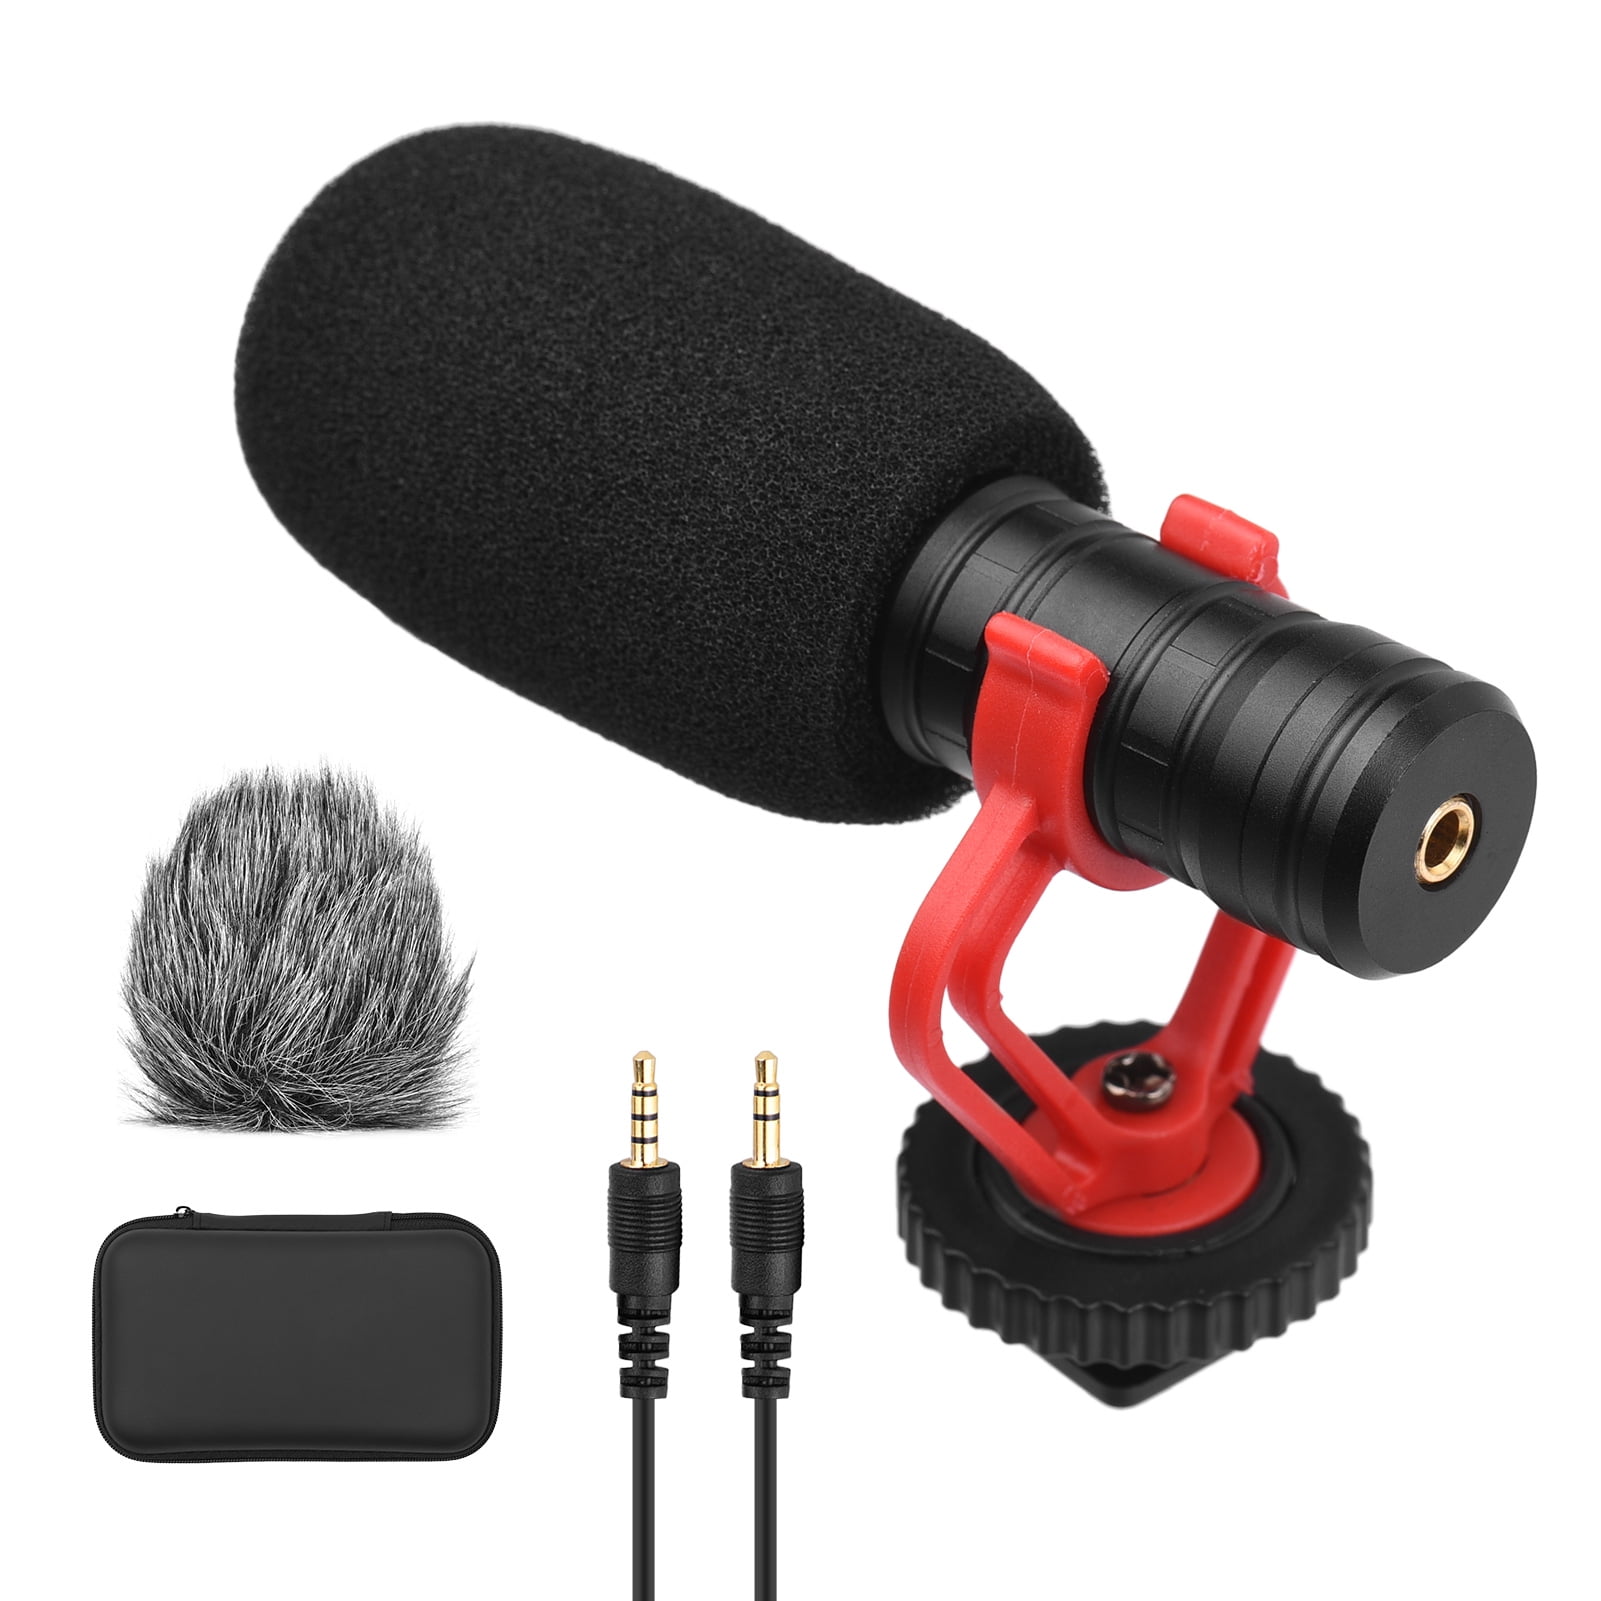 Andoer Condenser Microphone Video Microphone with Sponge Windshield Shockproof Mount Compatible with Canon Nikon Sony DSLR/ILDC Camera Video Recorders Smartphone 